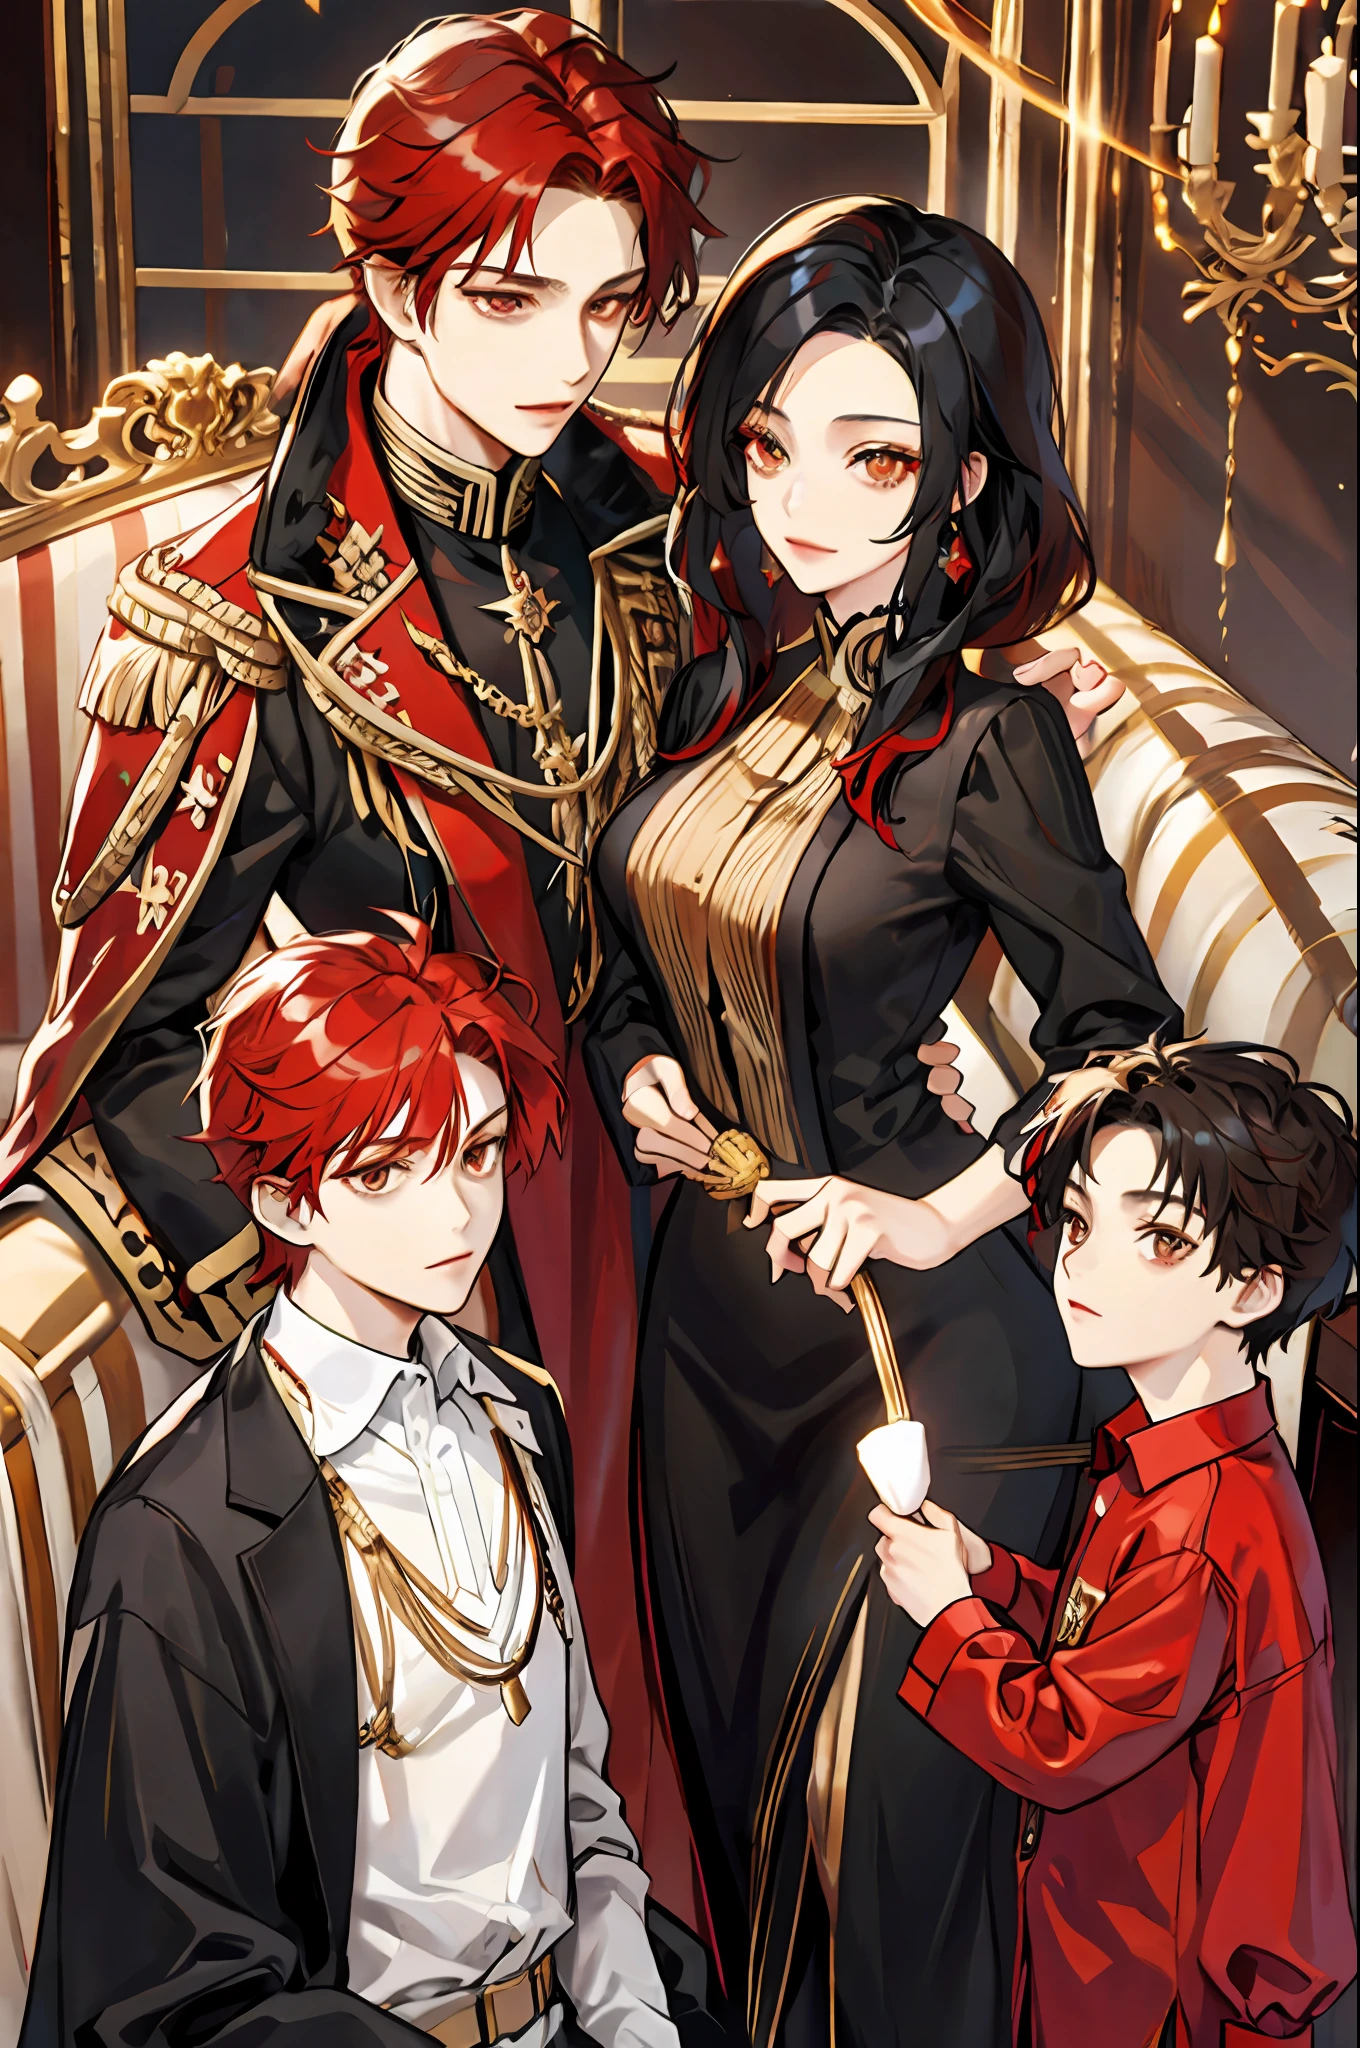 royal family, elegant, matching clothing, woman with black hair and brown eyes, man with red hair and golden eyes, teenage son with black hair and golden eyes,  toddler  daughter with red hair and brown eyes